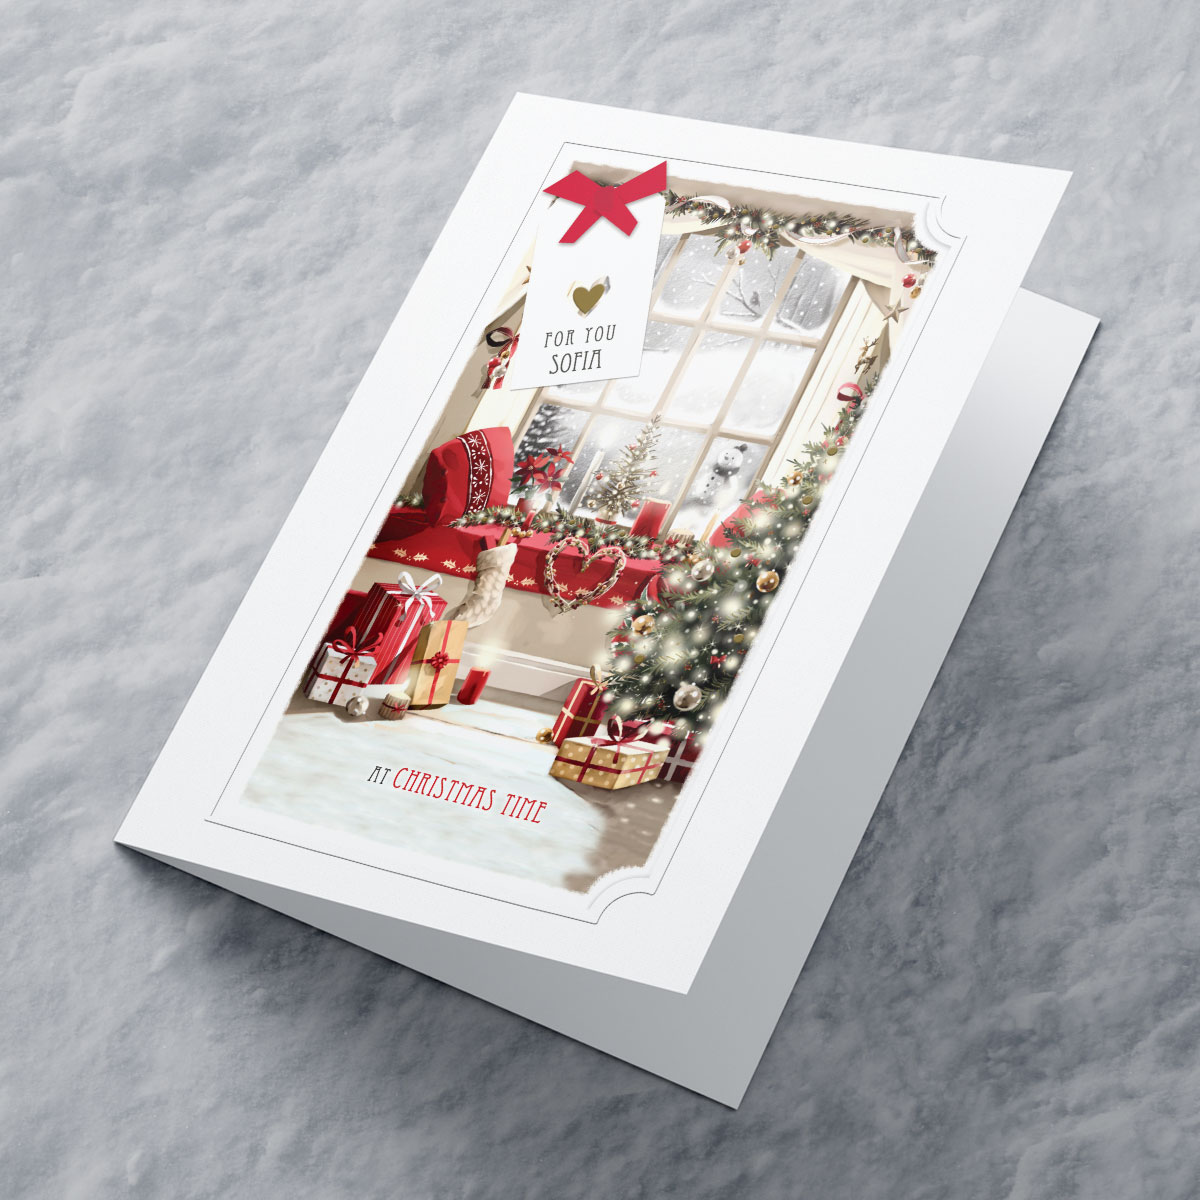 Personalised Christmas Card - Presents By The Window